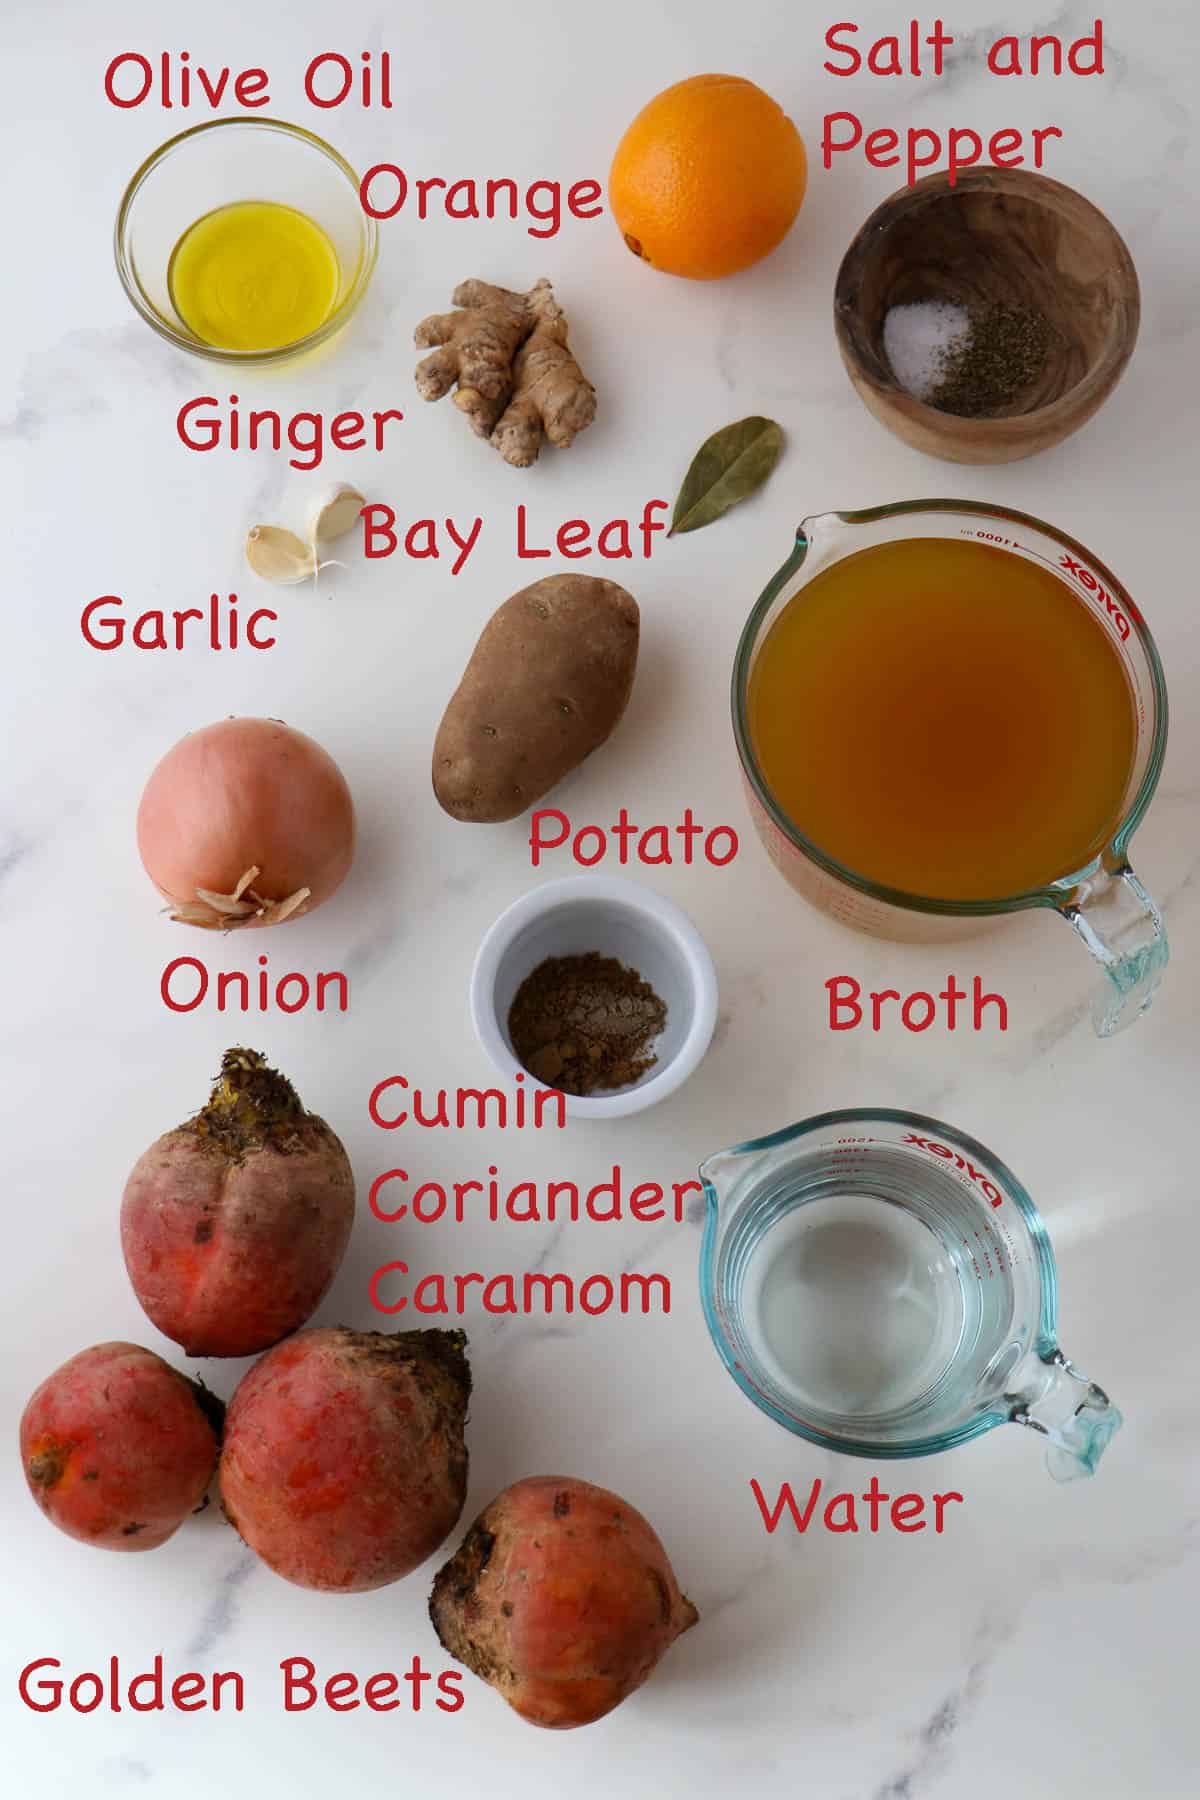 Labeled ingredients for Golden Beet Soup.